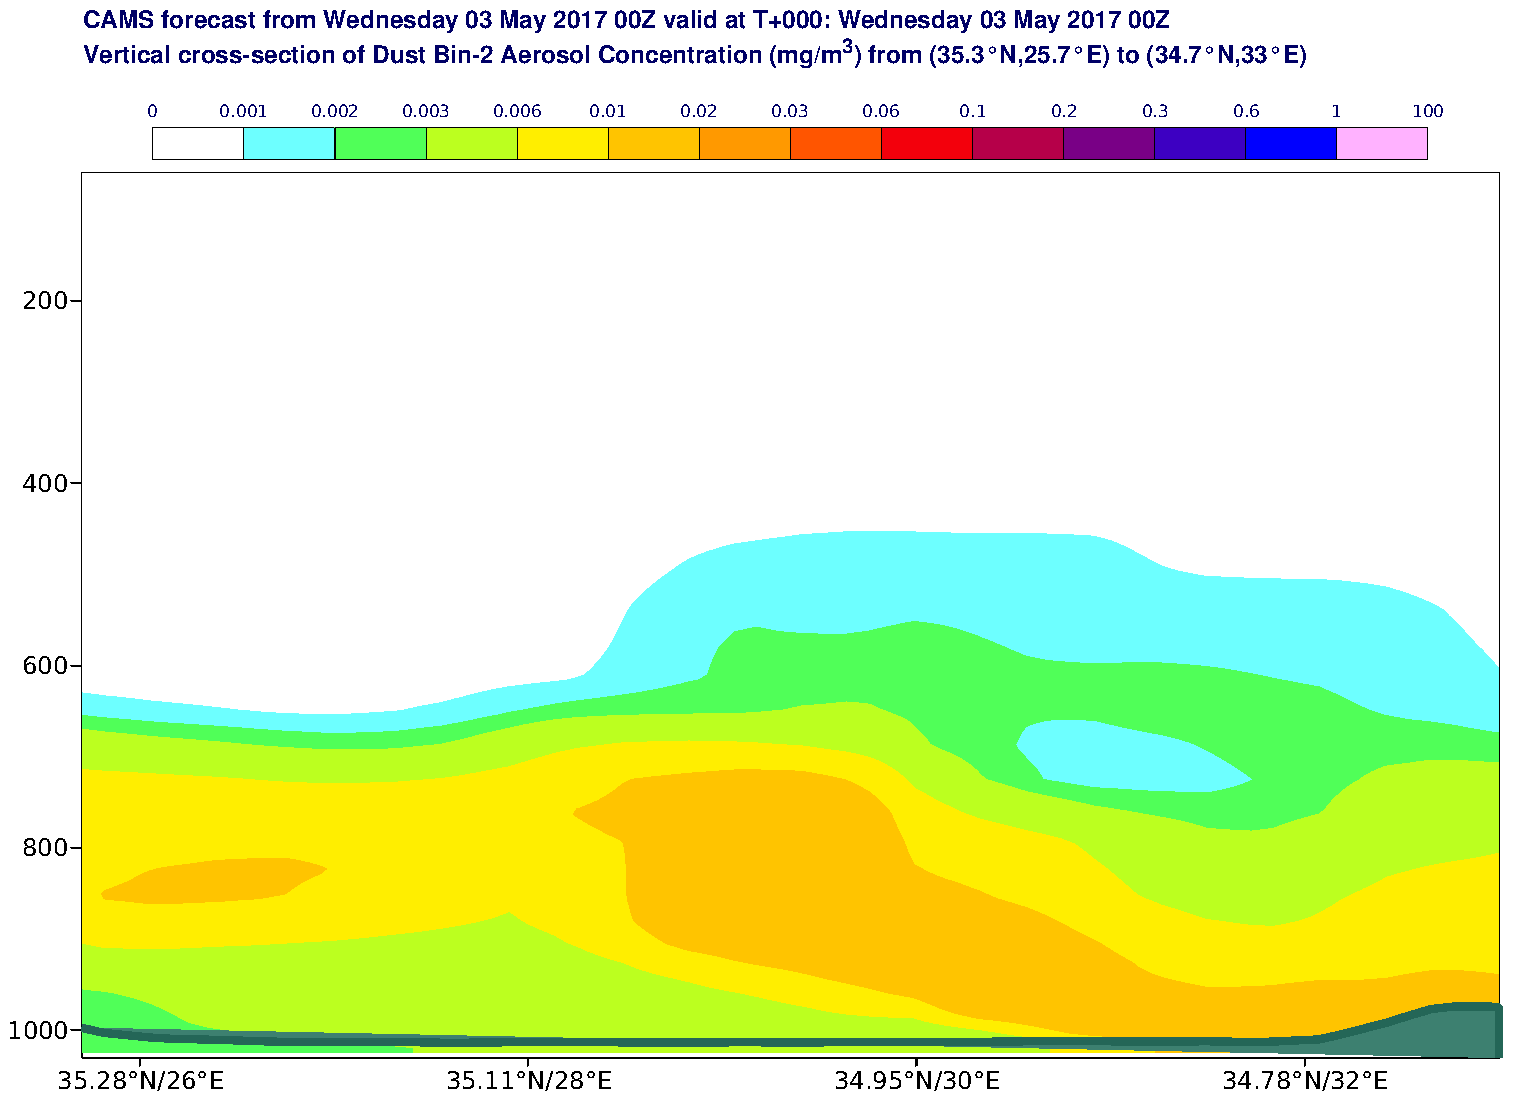 Vertical cross-section of Dust Bin-2 Aerosol Concentration (mg/m3) valid at T0 - 2017-05-03 00:00